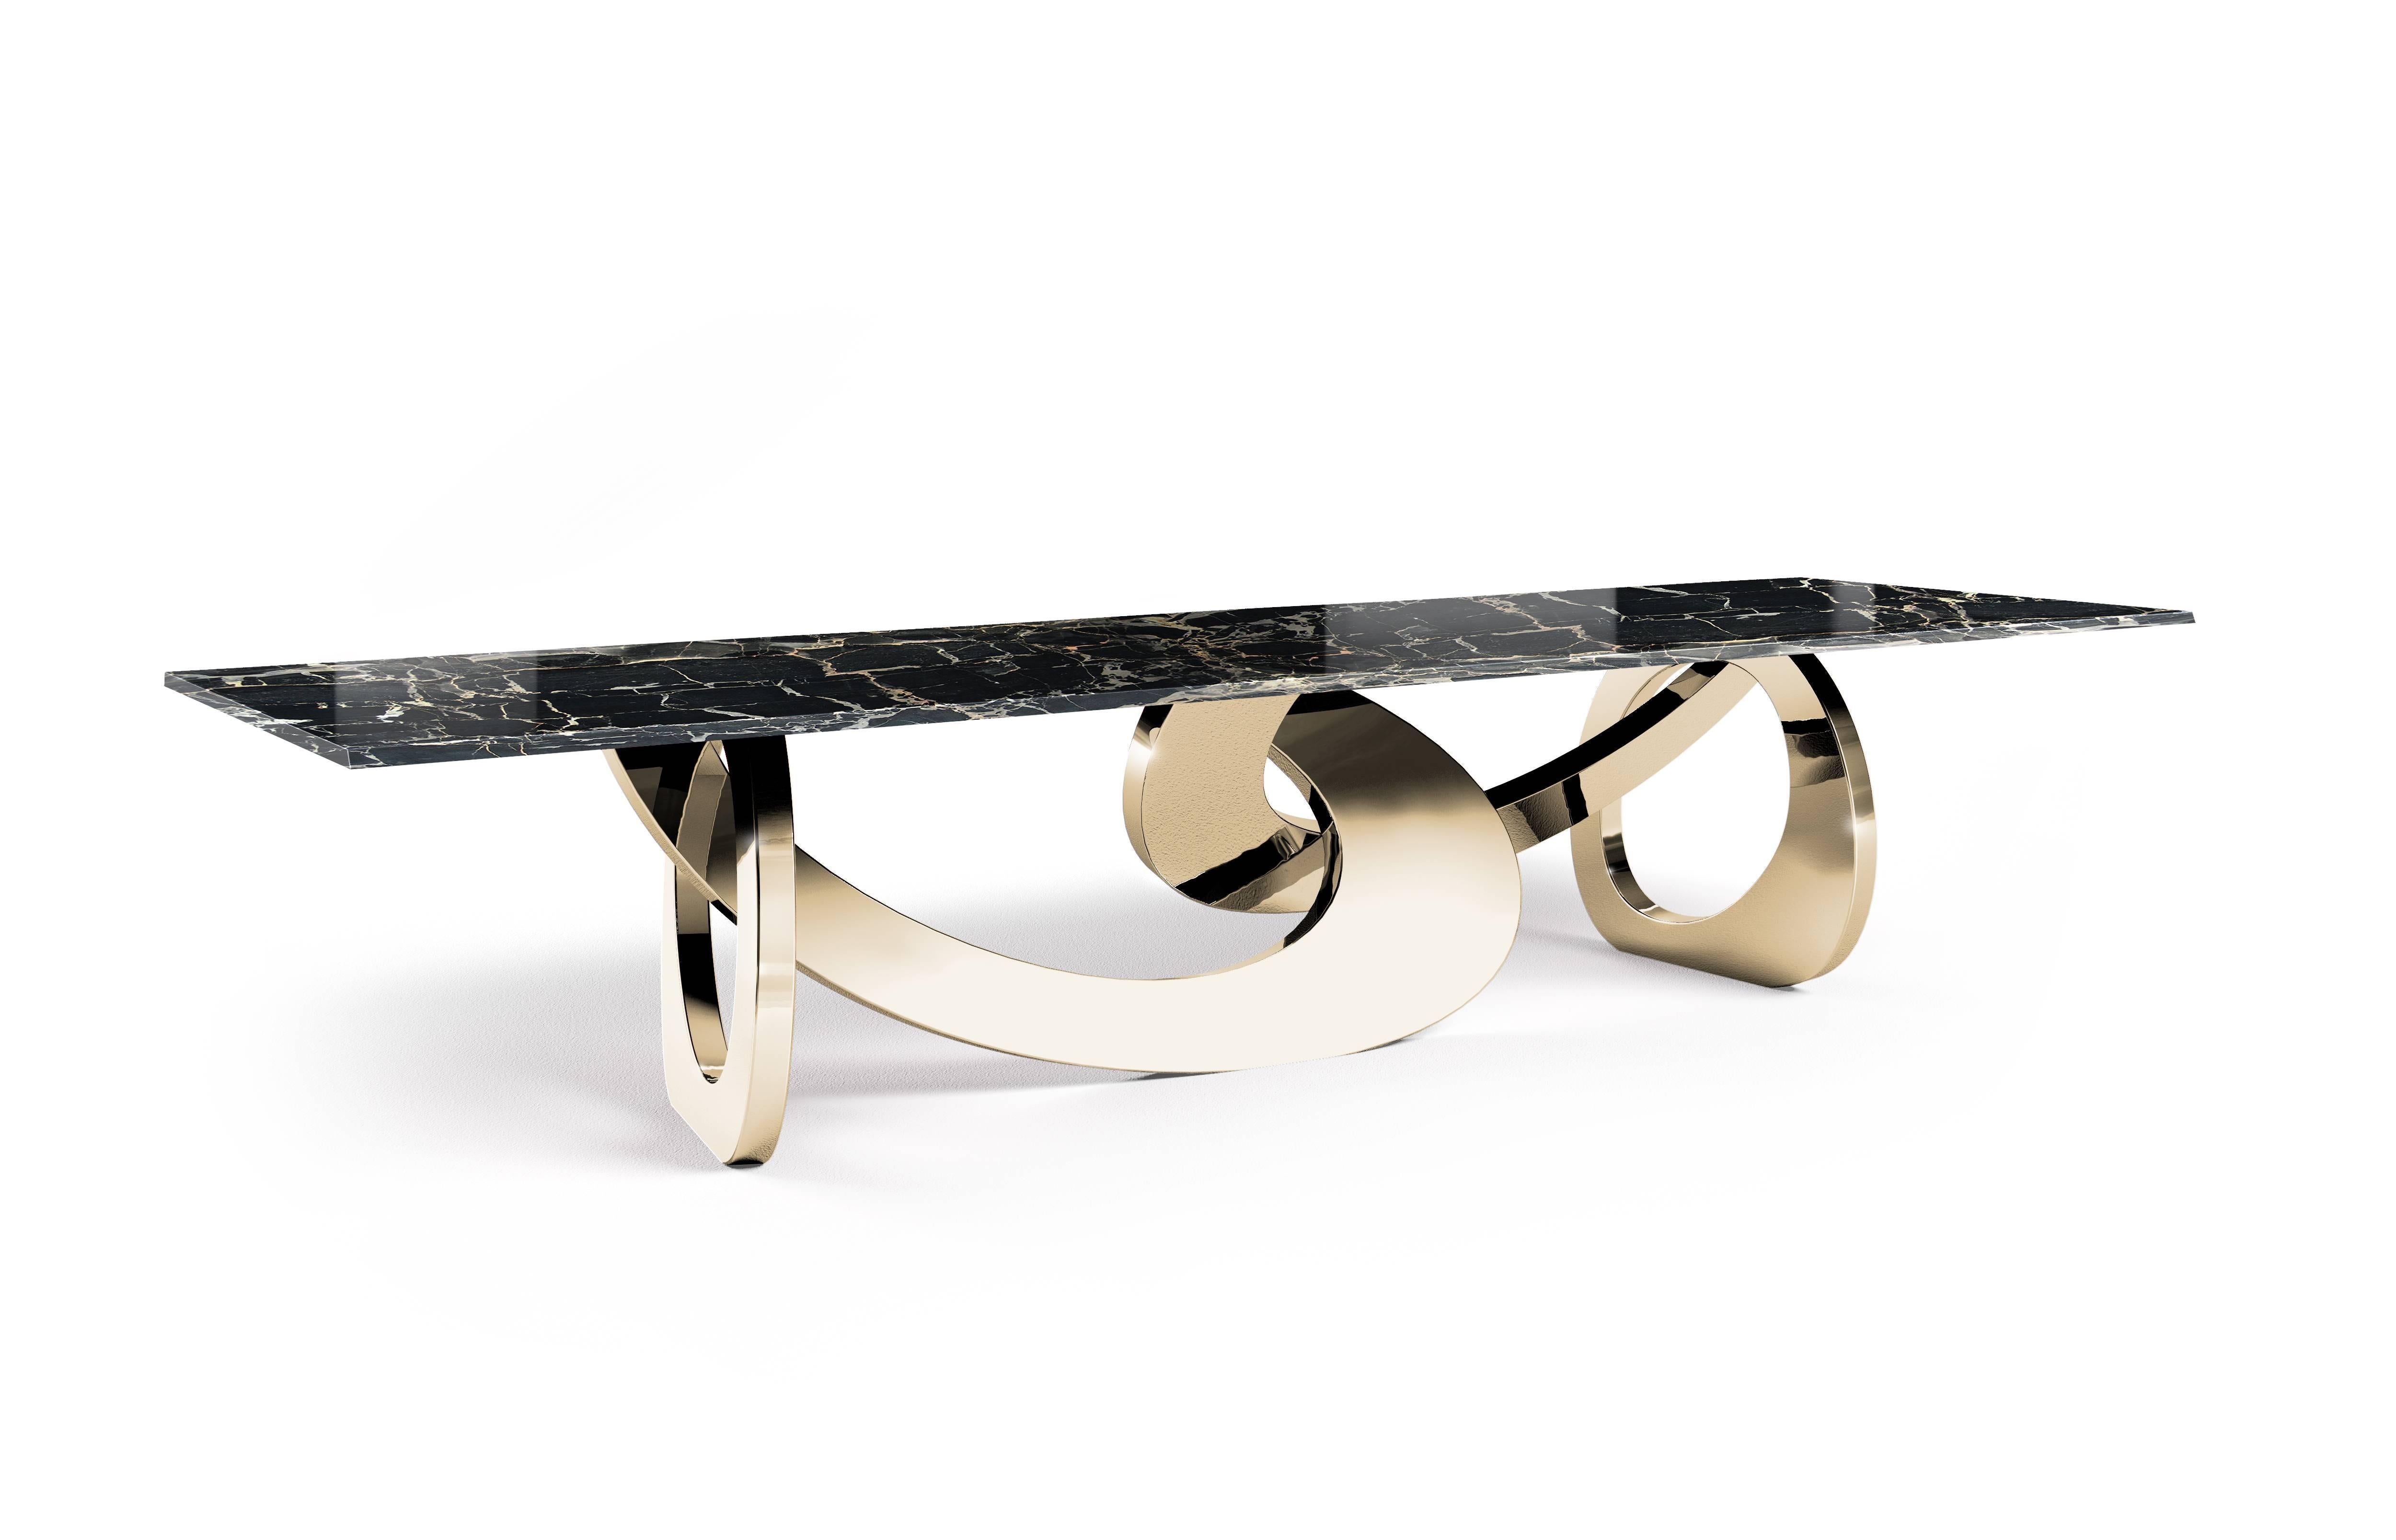 The table 'Bangles Stone' is an important dining table with structure in gold colored mirror polished stainless steel and top in Carrara marble, origin: Tuscany. The coloring of the table structure is not a varnish but penetrates the steel and